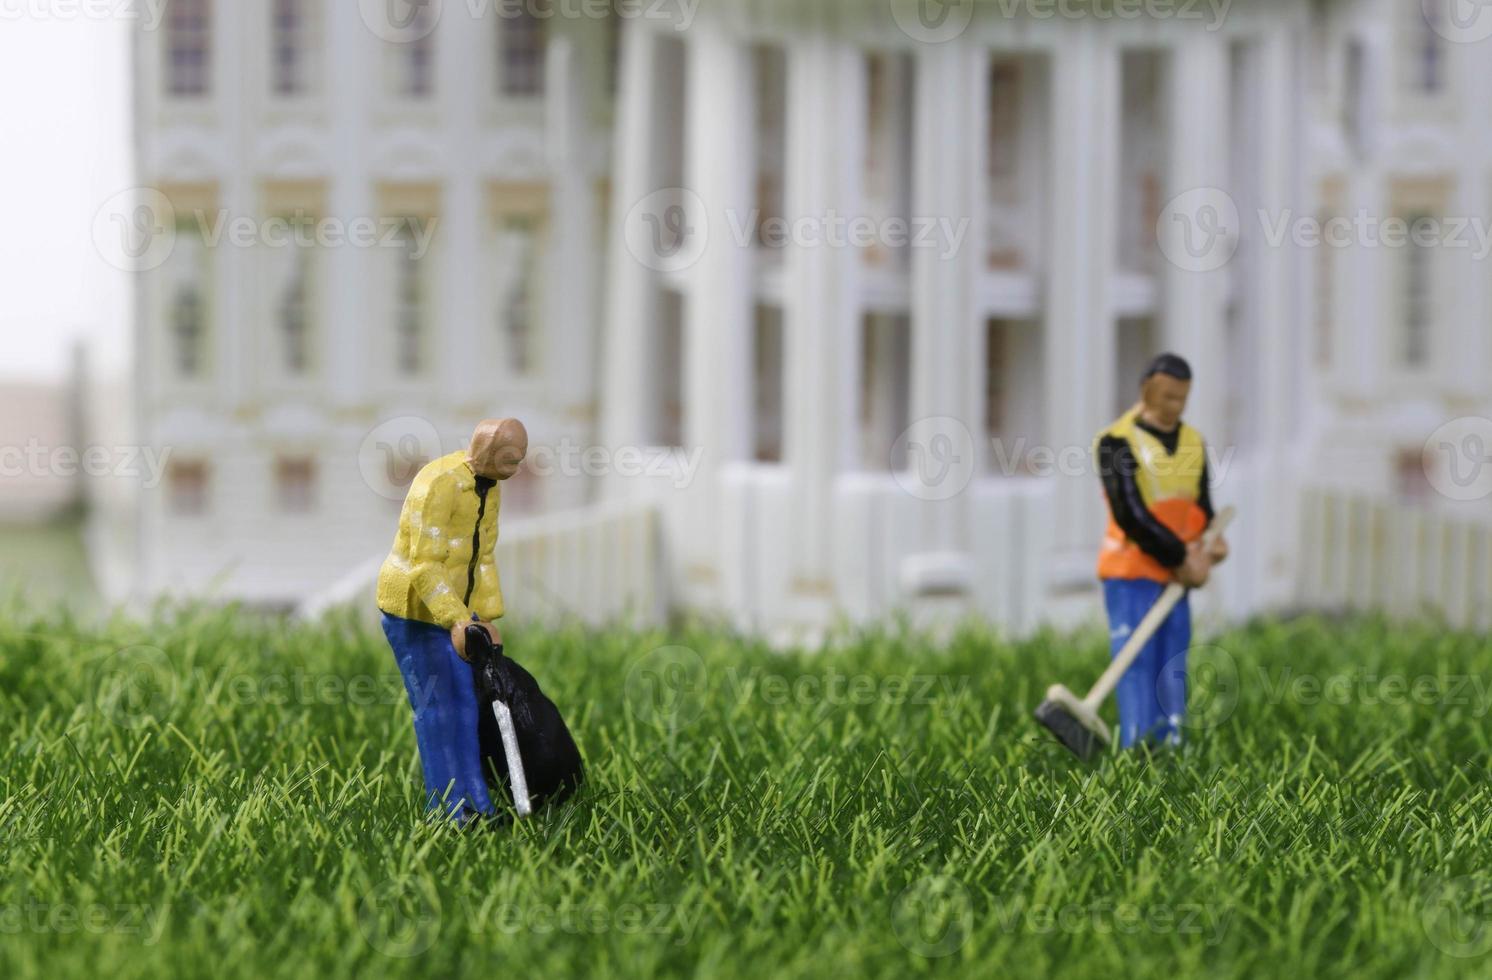 Cleaning workers standing on the grass in front of building photo